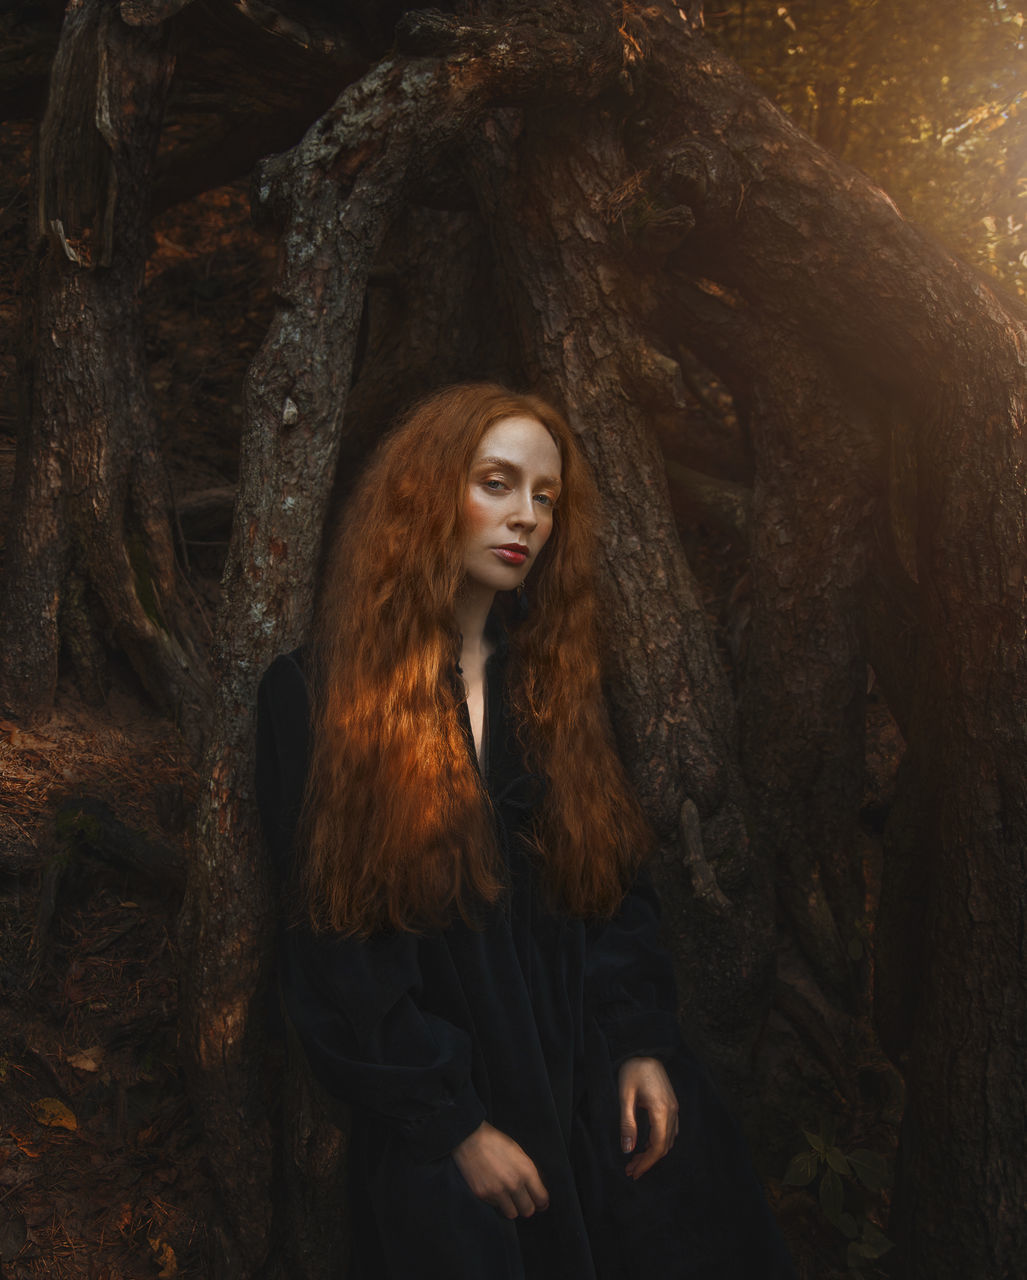 long hair, hairstyle, darkness, one person, women, young adult, portrait, adult, redhead, tree, forest, nature, land, brown hair, looking, leisure activity, clothing, front view, cave, fashion, looking at camera, lifestyles, standing, outdoors, curly hair, waist up, three quarter length, plant, female, contemplation